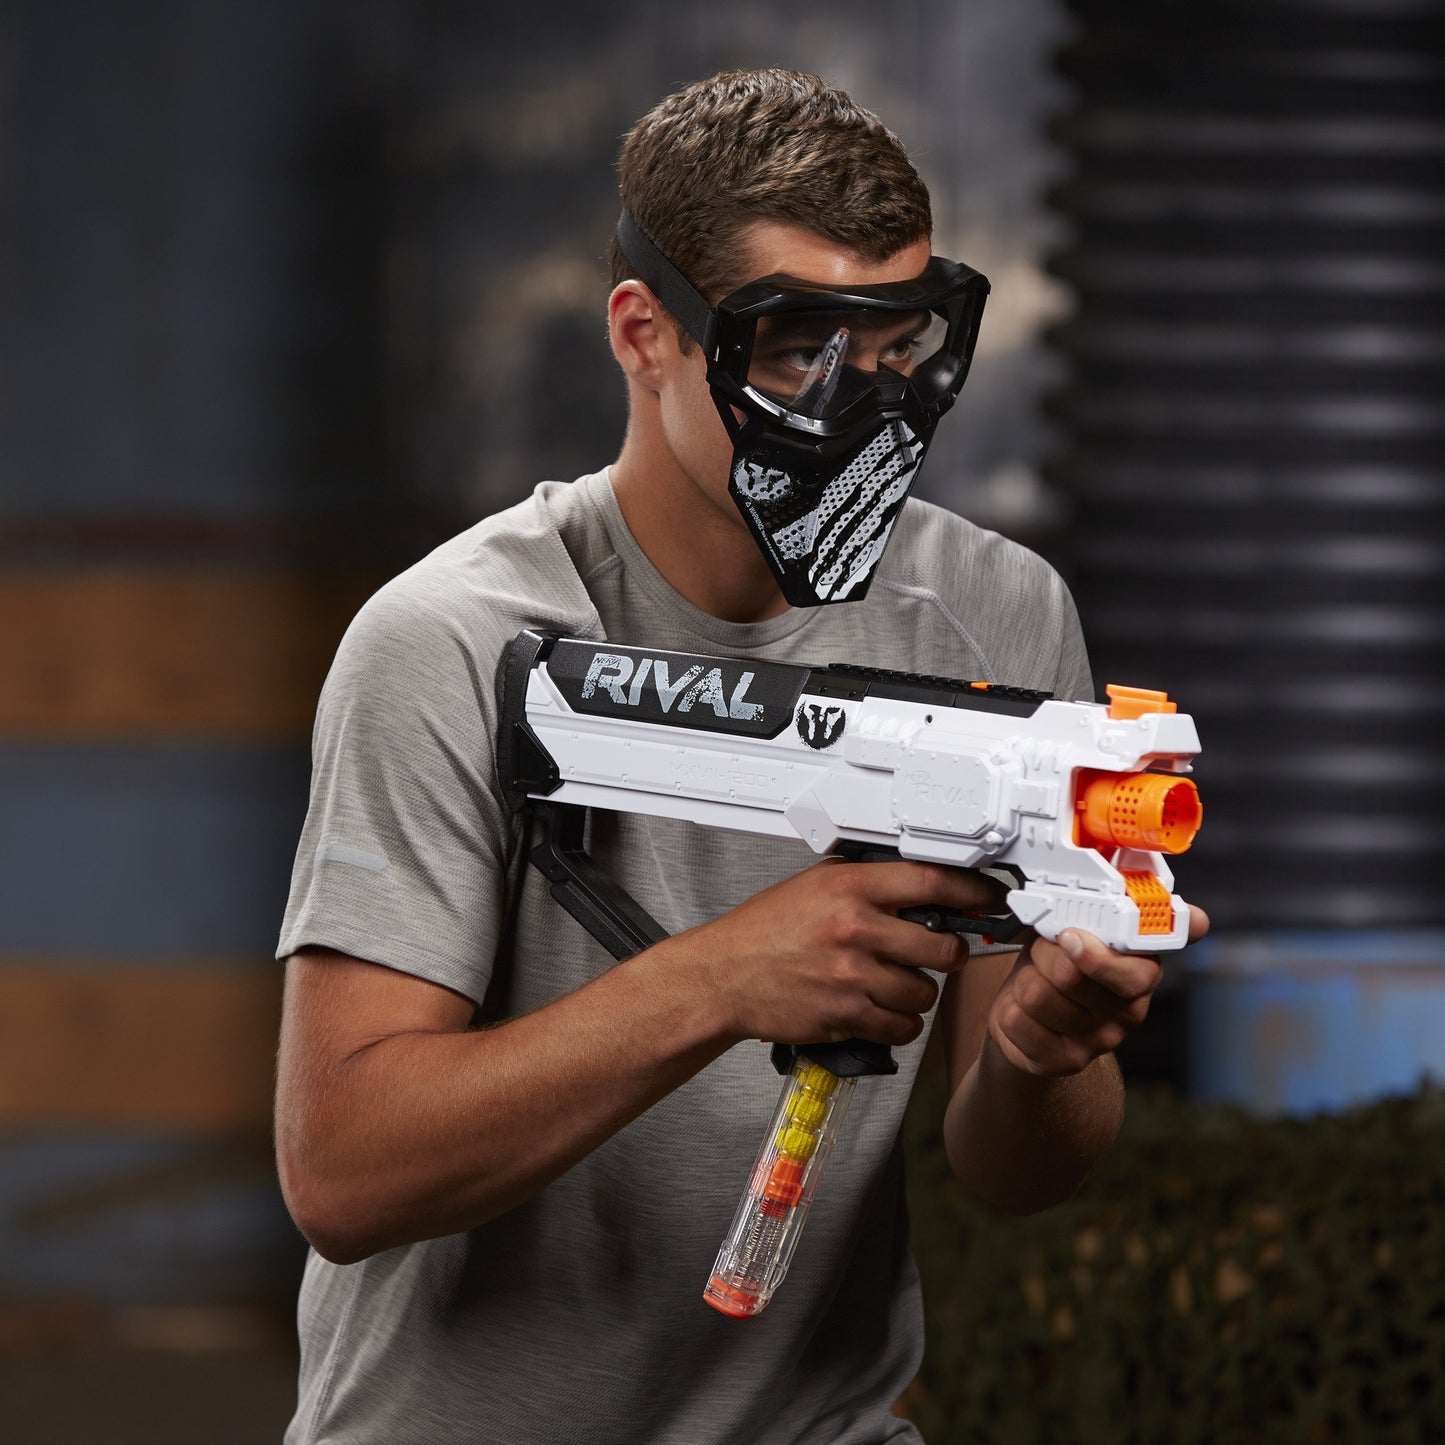 Nerf Rival Phantom Corps Face Mask, White Color Scheme, Breathable Design, Adjustable Band, Nerf Accessories for 14 Year Old Boys and Girls